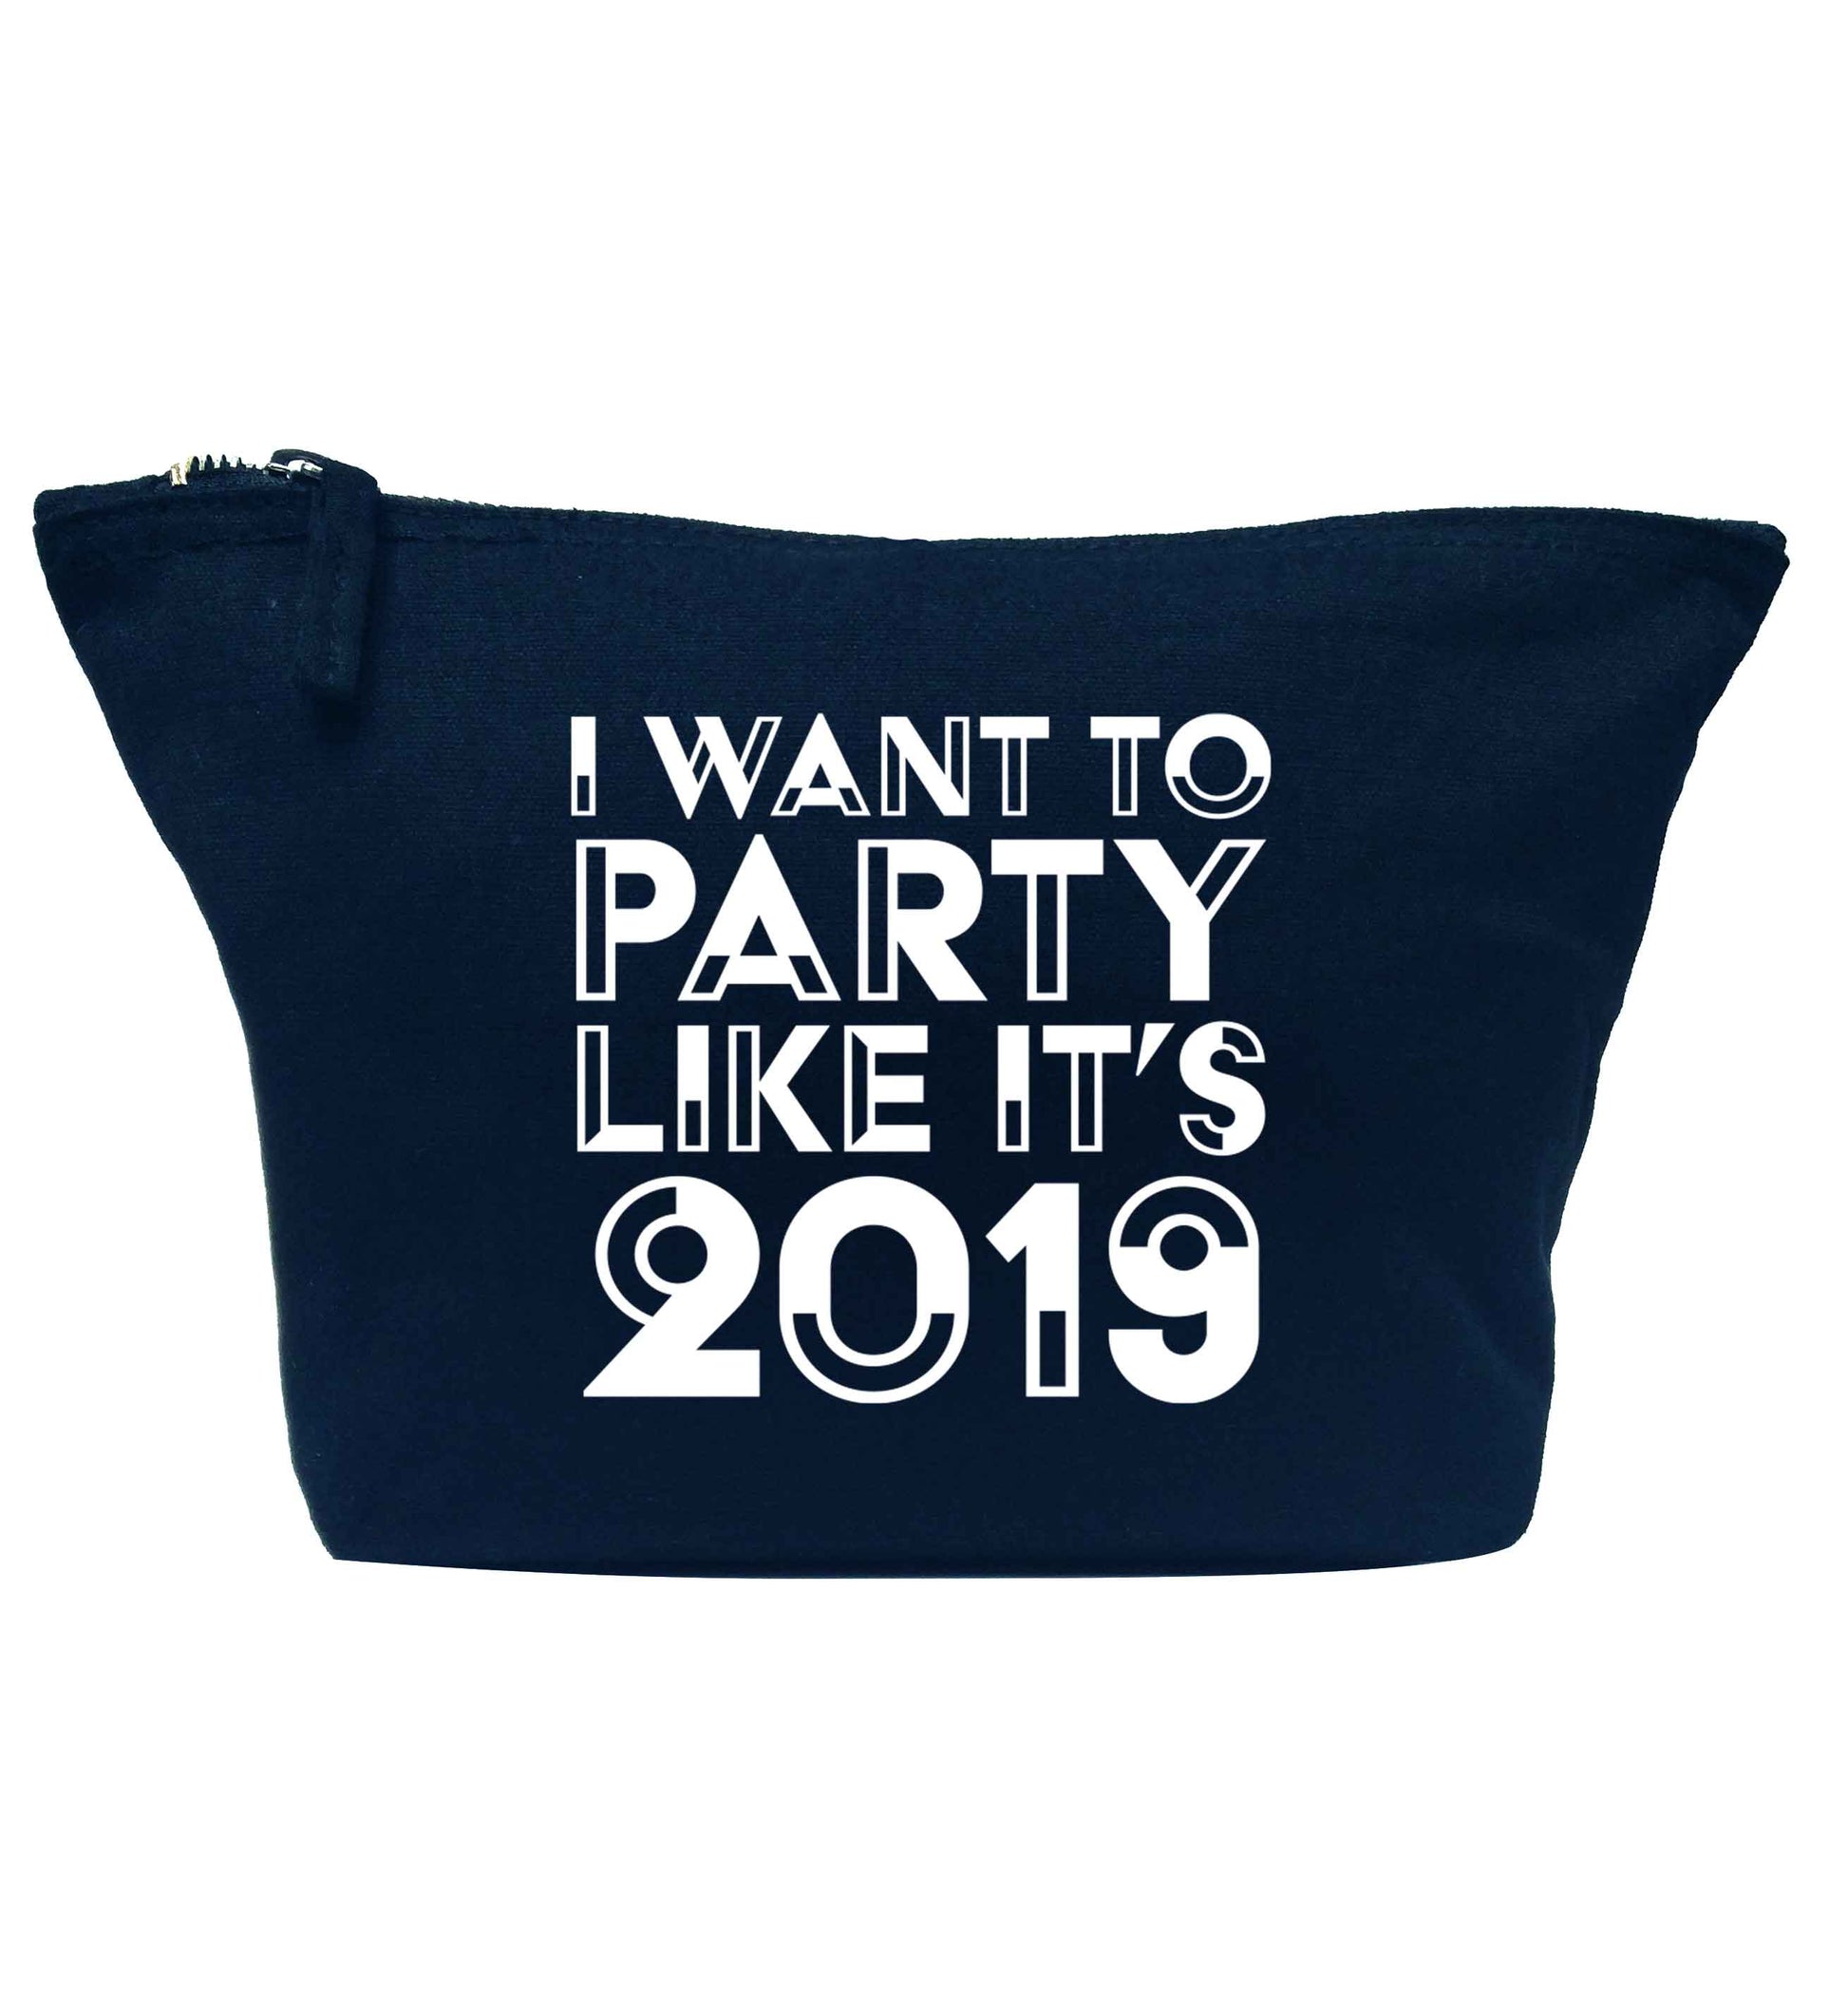 I want to party like it's 2019 navy makeup bag